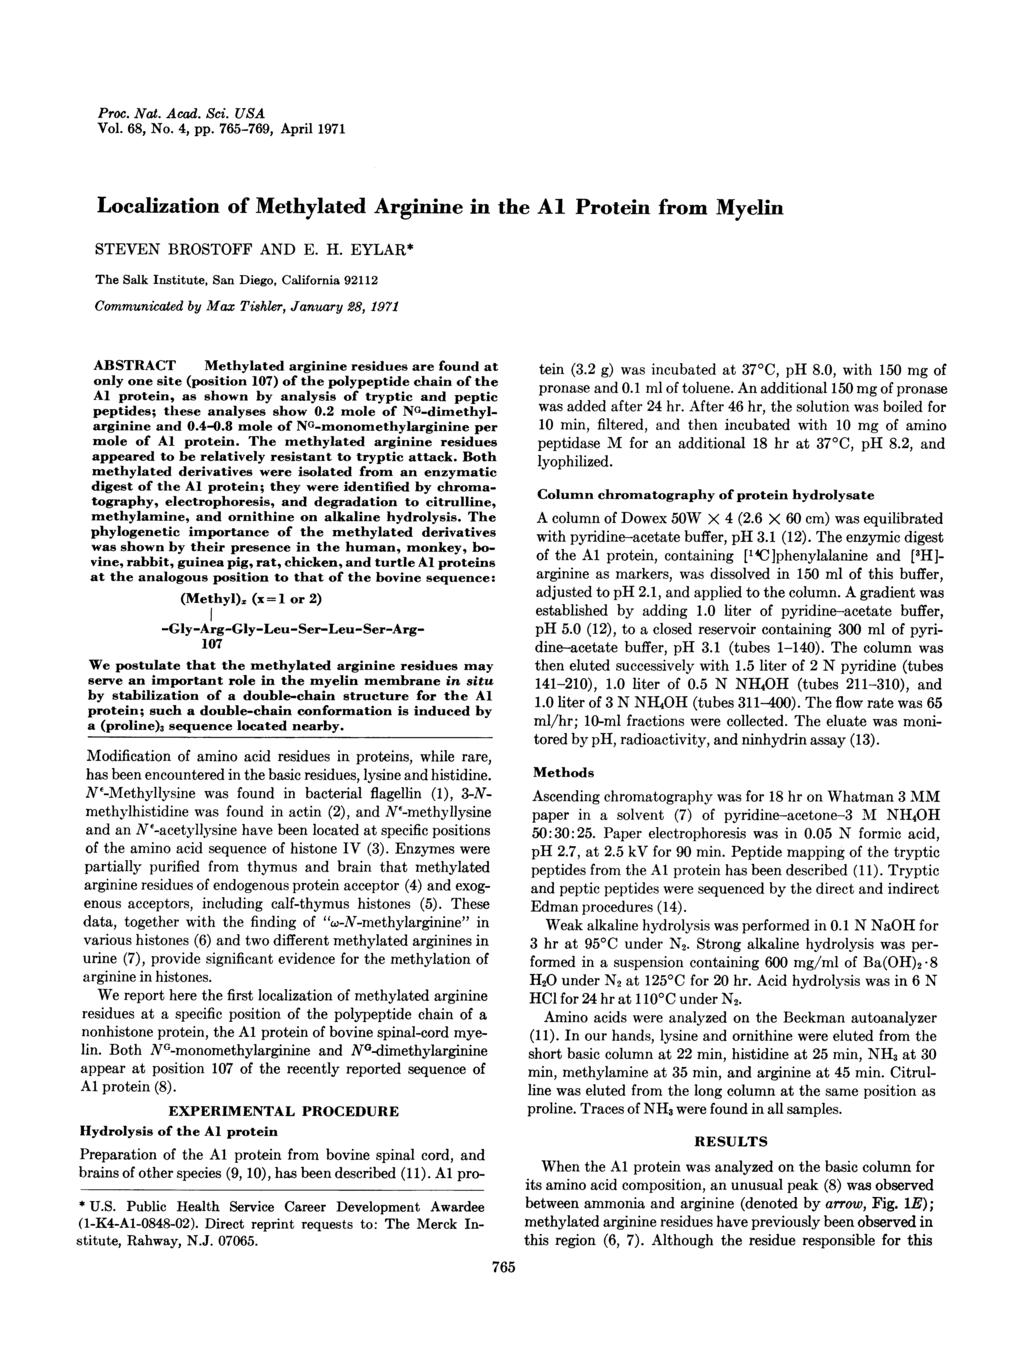 Proc. Nat. Acad. Sci. USA Vol. 68, No. 4, pp. 765-769, April 1971 Localization of Methylated Arginine in the Al Protein from Myelin STEVEN BROSTOFF AND E. H.